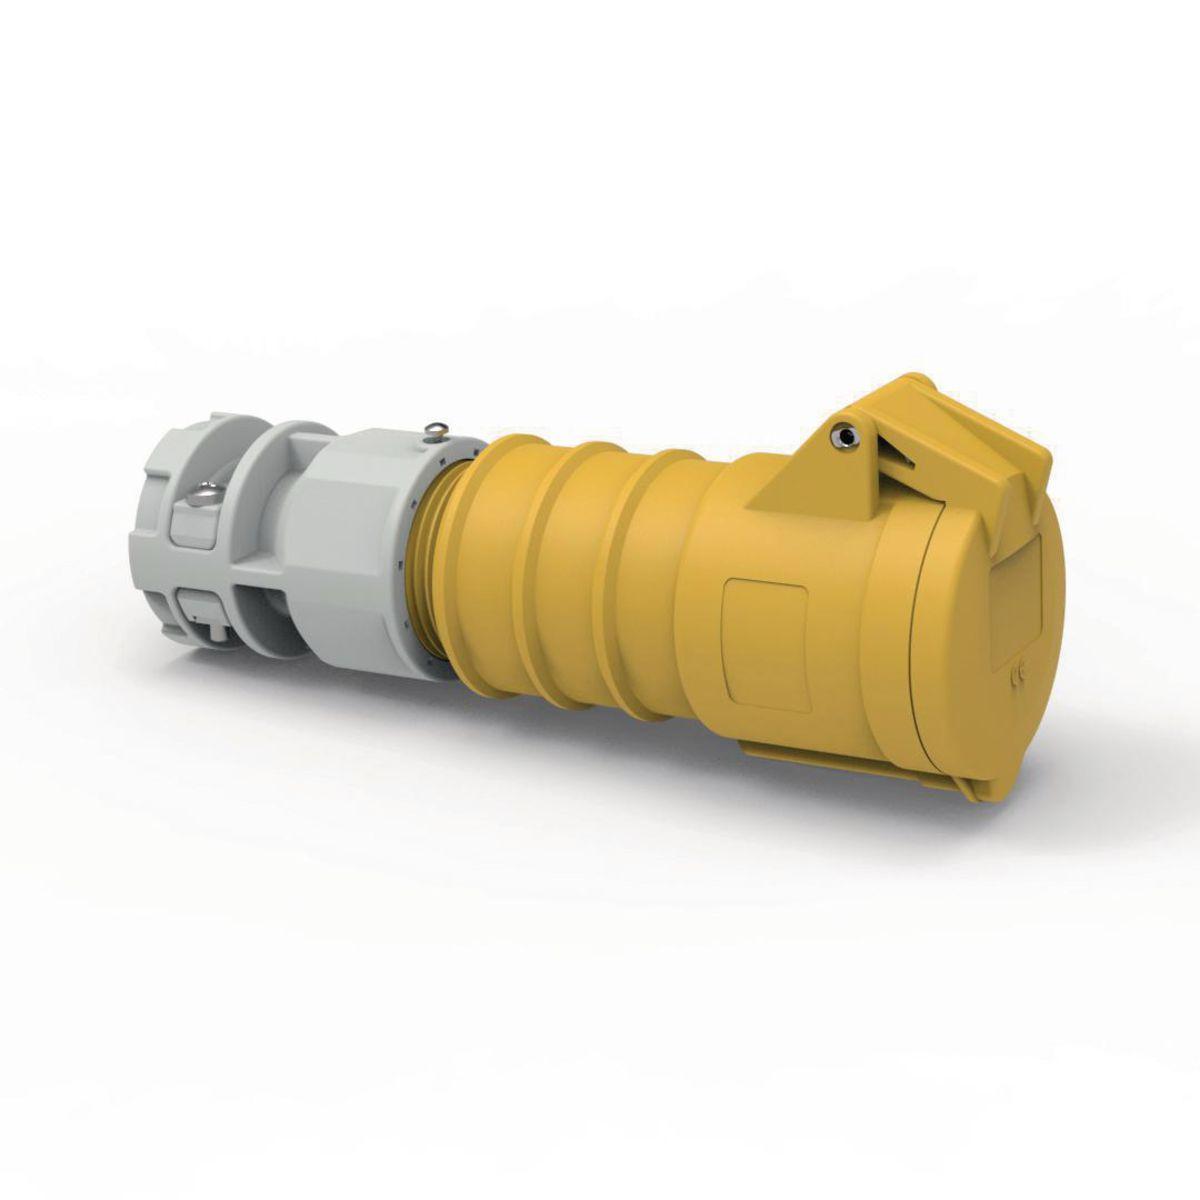 Hubbell C330C4SA Heavy Duty Products, IEC Pin and Sleeve Devices, Hubbell-PRO, Female, Connector Body, 30 A 125 VAC, 2-POLE 3-WIRE, Yellow, Splash Proof  ; IP44 environmental ratings ; Impact and corrosion resistant insulated non-metallic housing ; Sequential contact enga